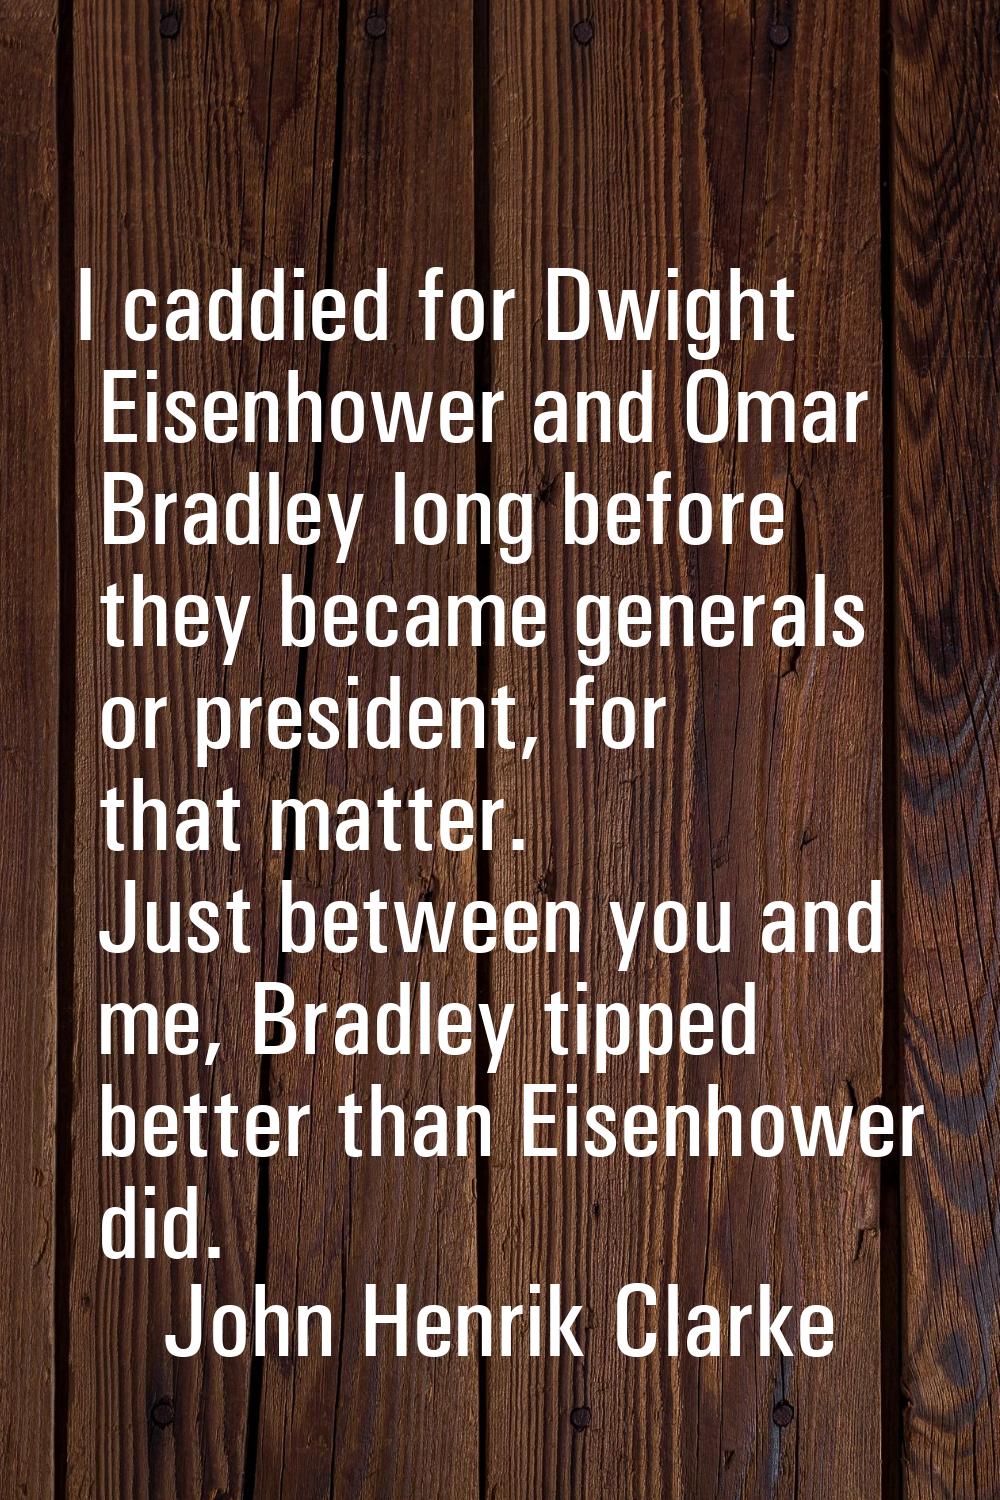 I caddied for Dwight Eisenhower and Omar Bradley long before they became generals or president, for